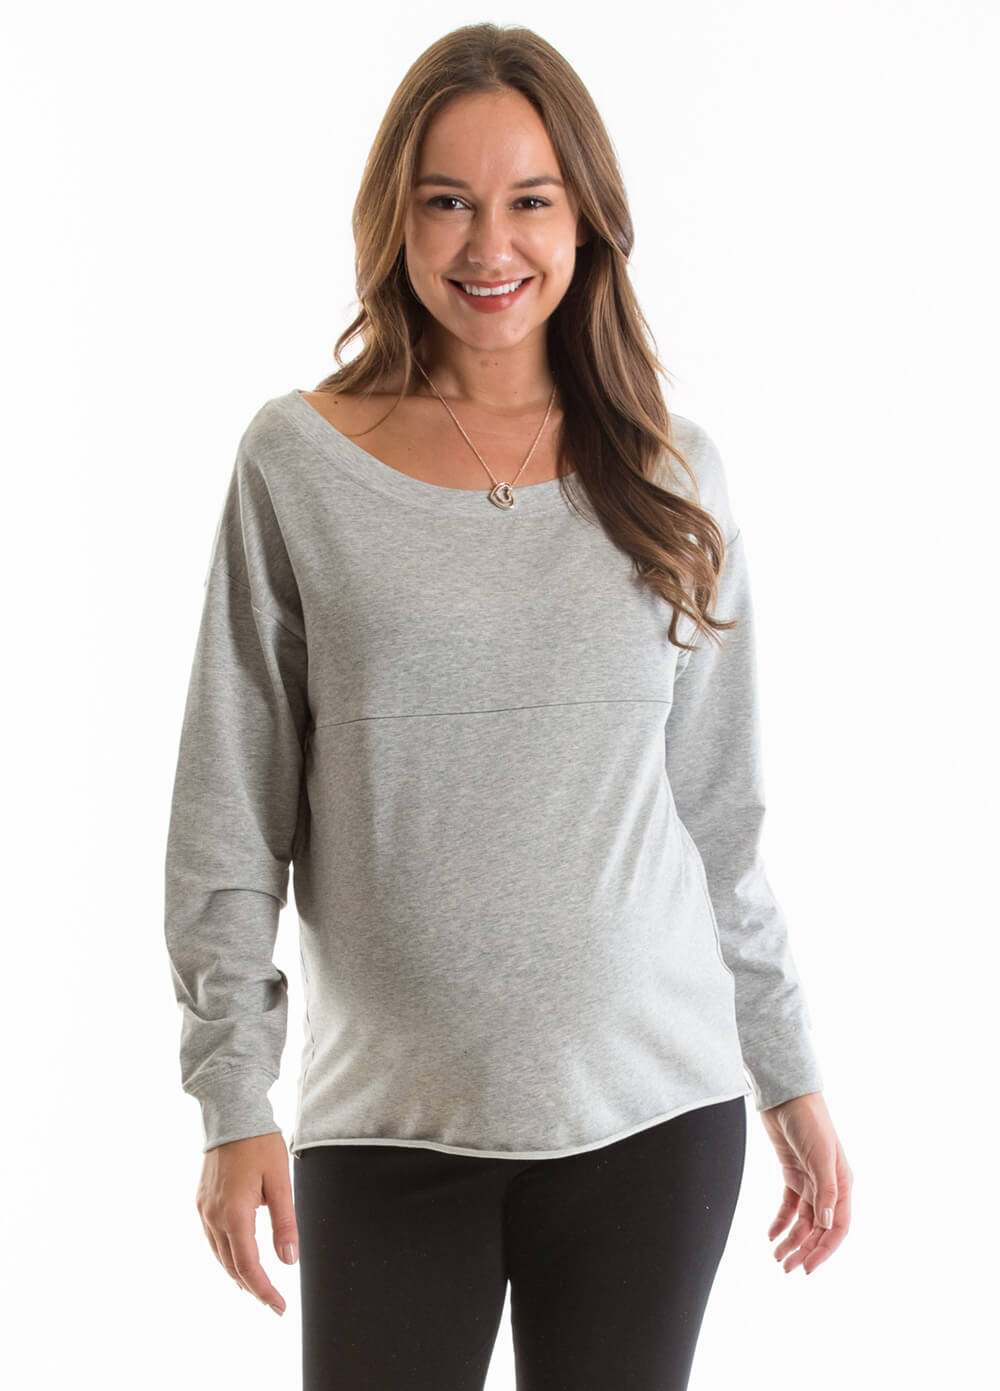 Marne Maternity & Nursing Sweater by Lait & Co